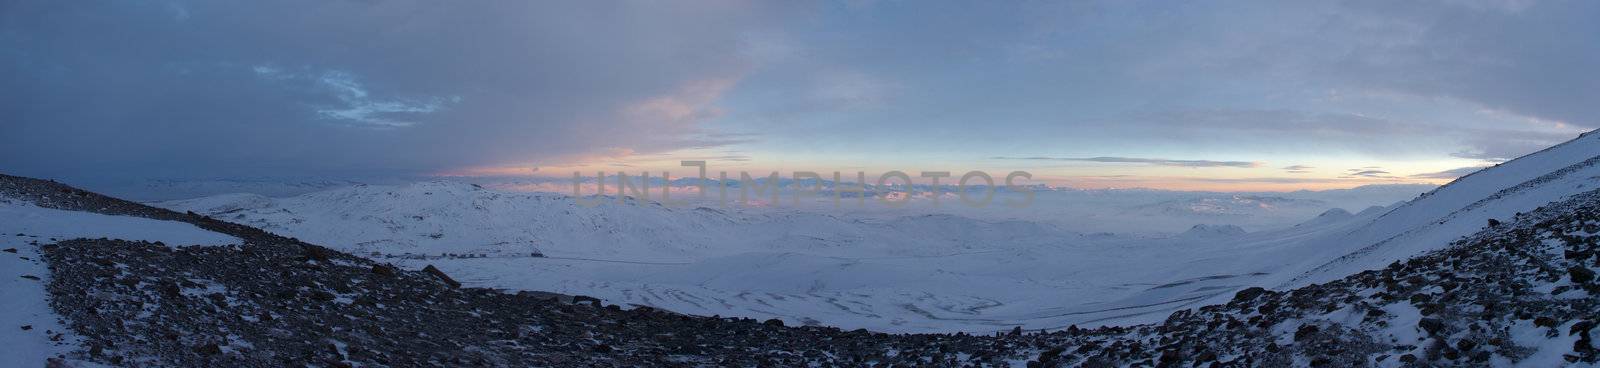 Winter view from Mount Erciyes, Turkey